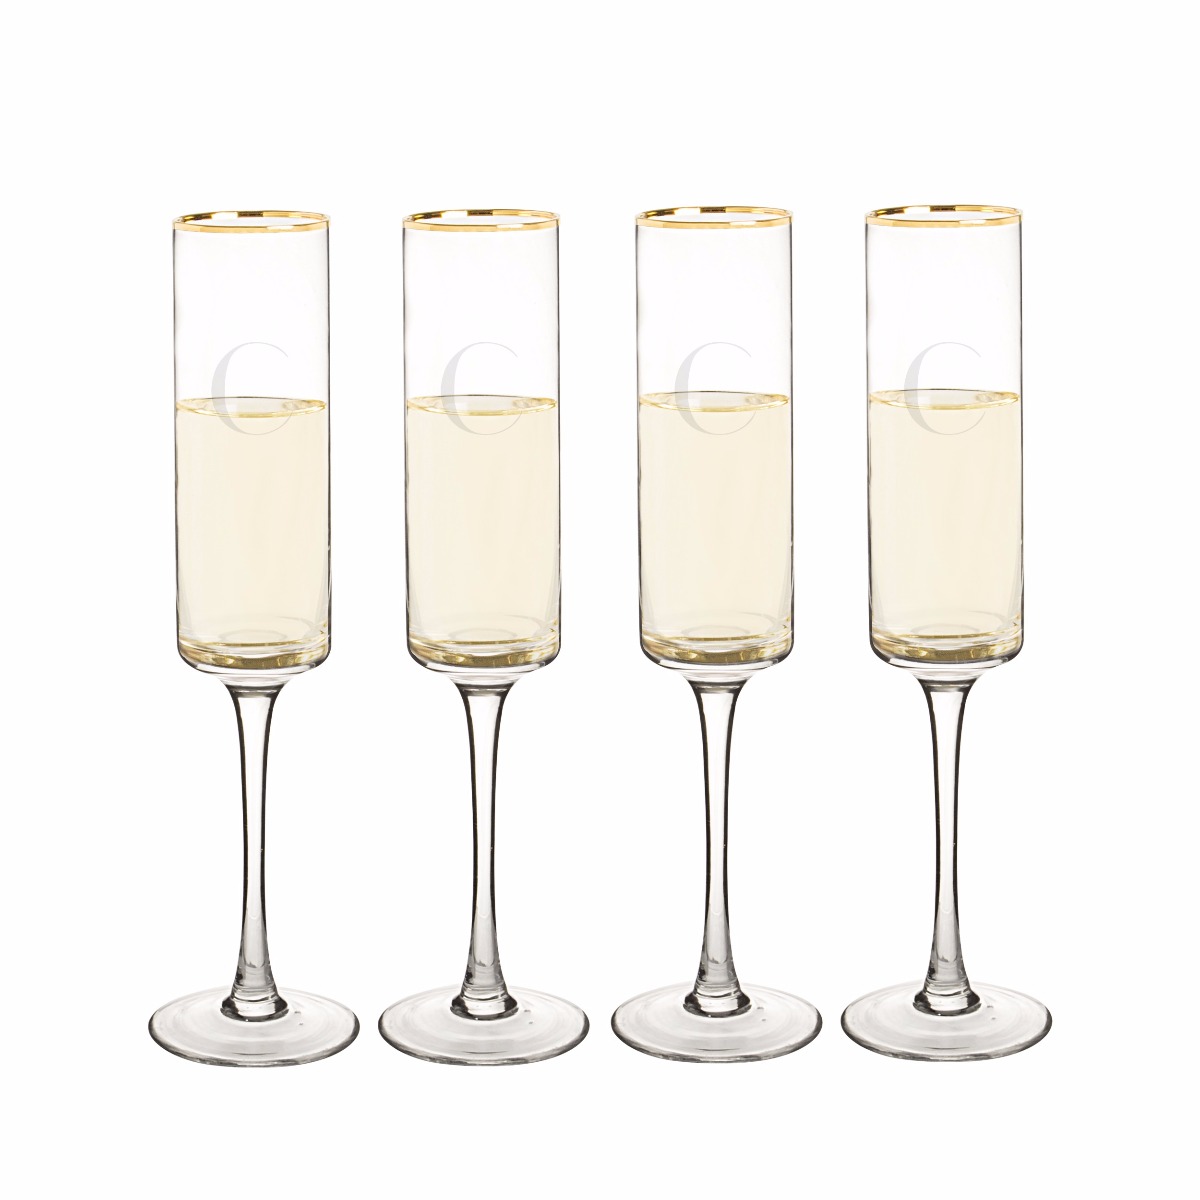 Personalized Gold Rim Champagne Flutes (set of 4)